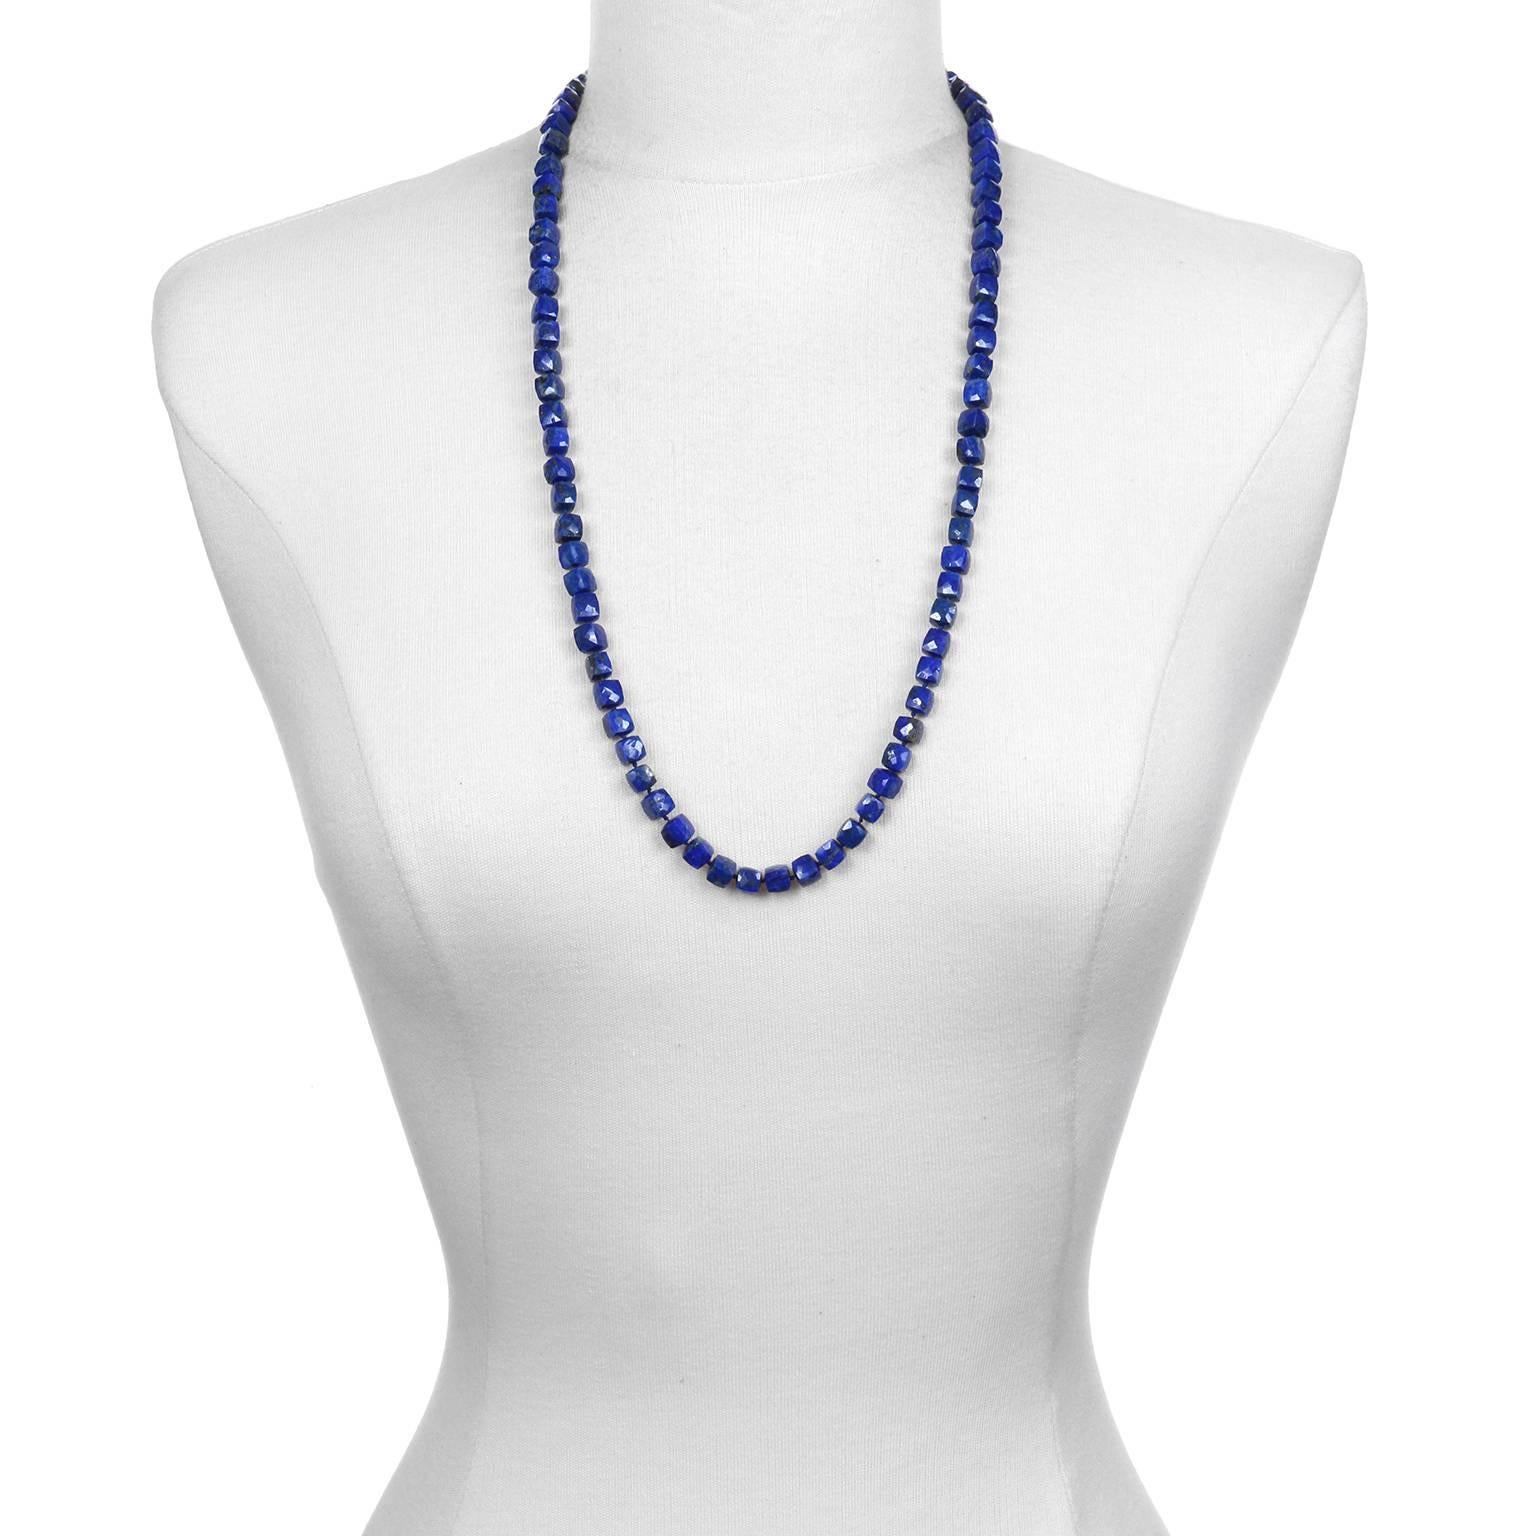 Faye Kim's vibrant blue Lapis Lazuli cube necklace is hand knotted and finished with silk ties.  A modern take on bead necklaces, the silk ties are 12